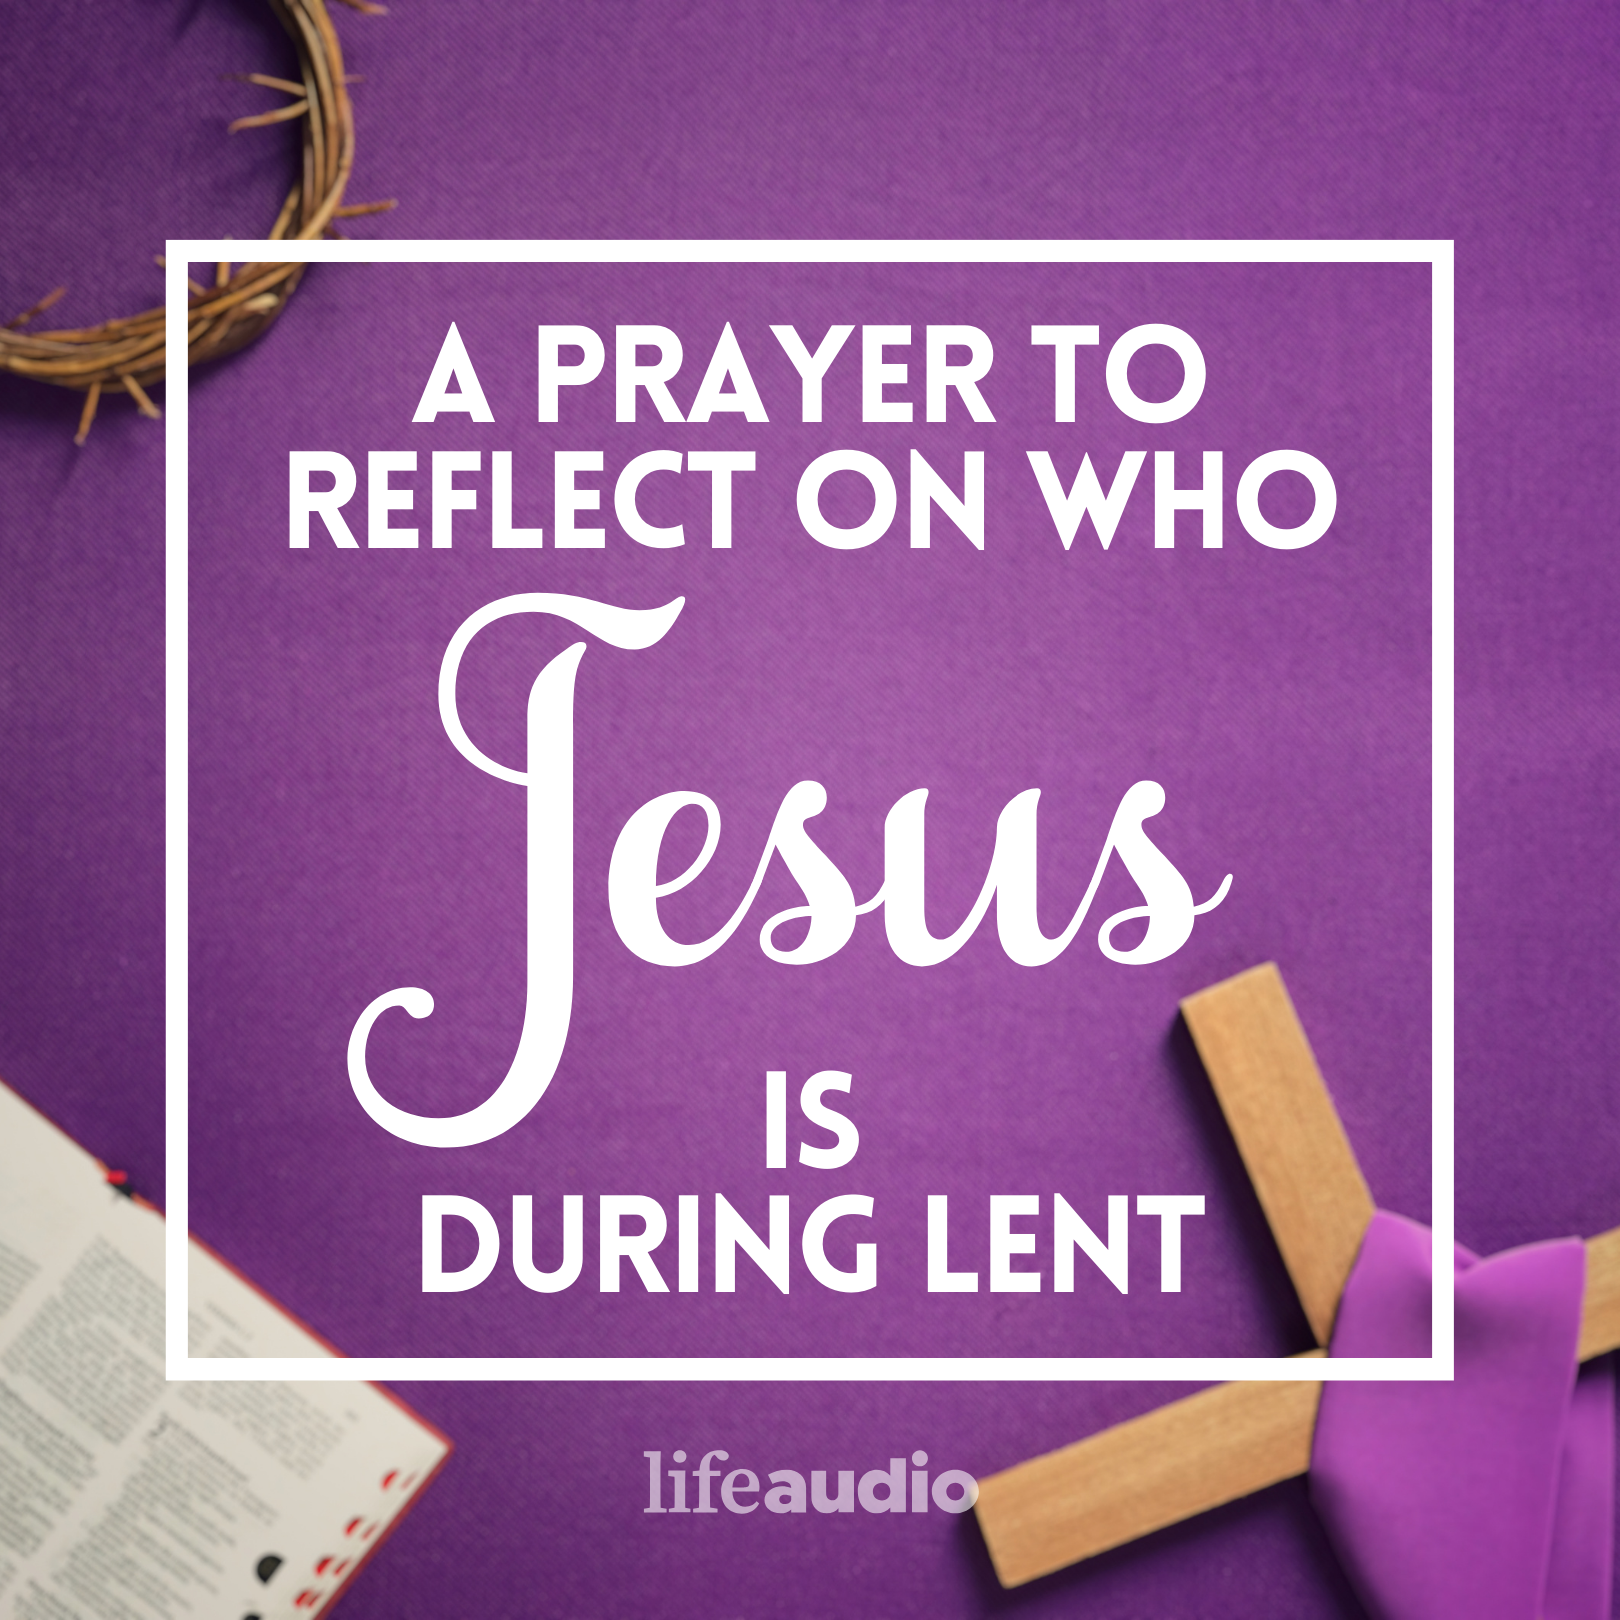 A Prayer to Reflect on Who Jesus Is during Lent